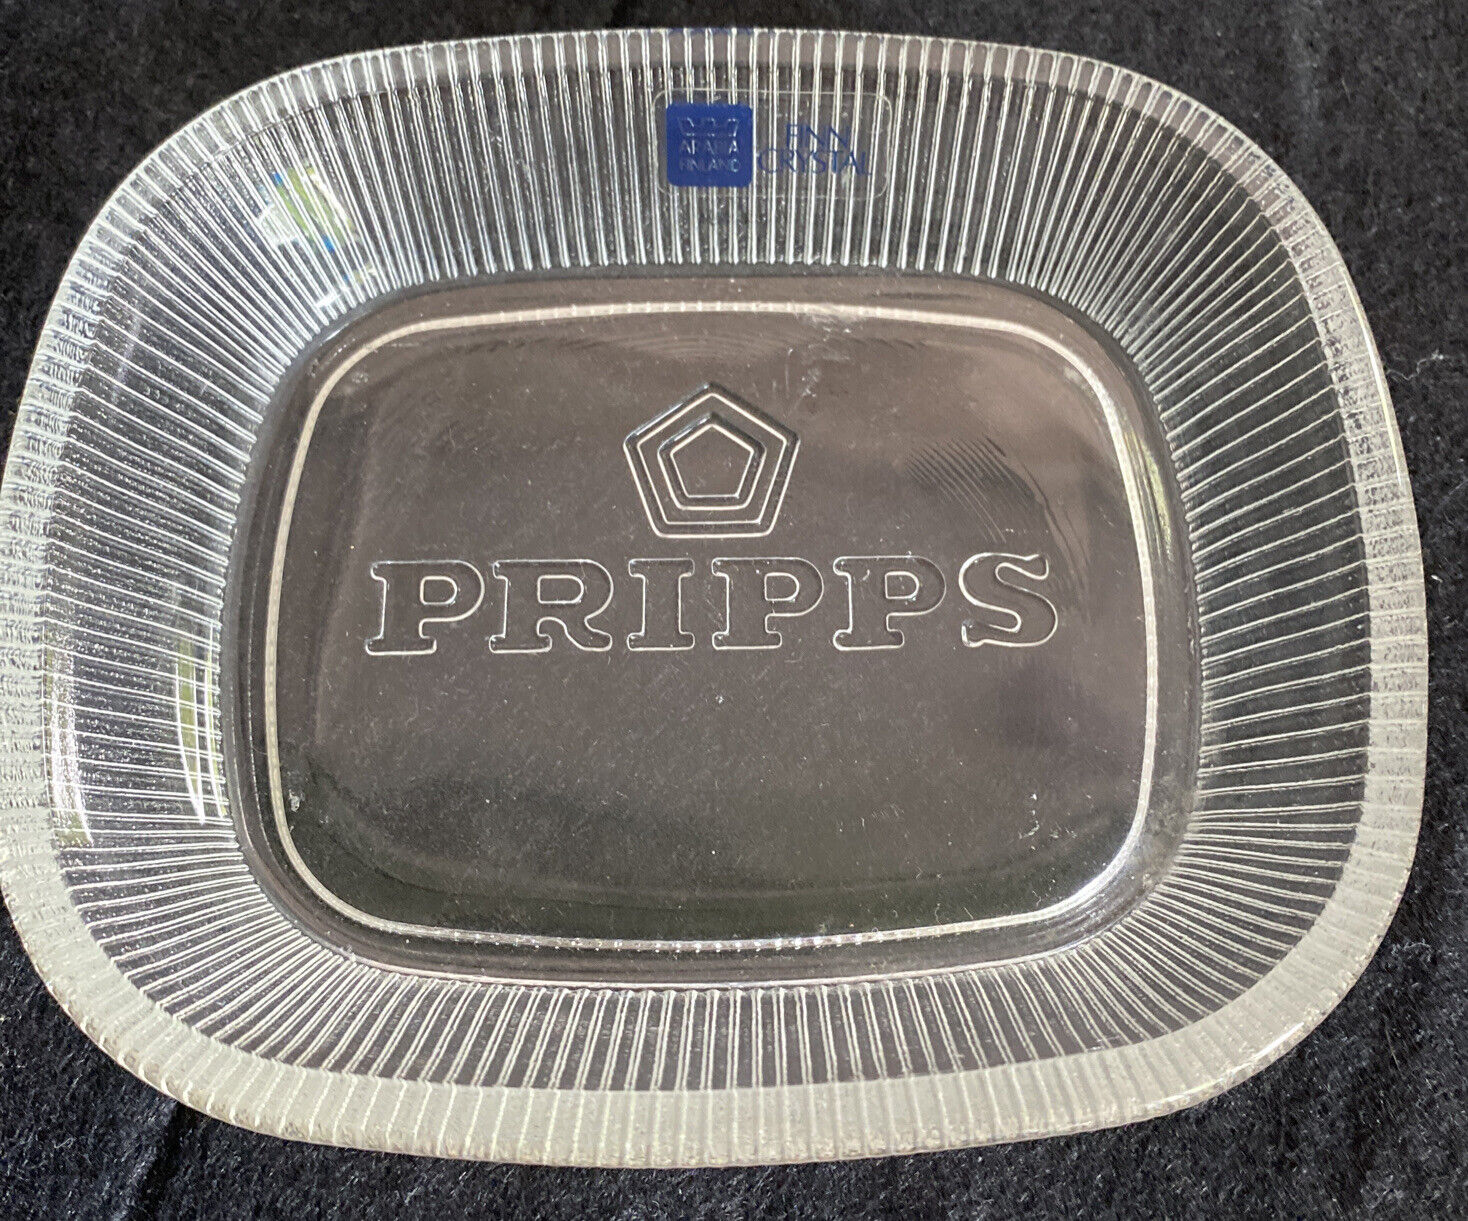 1970’s Arabia Finland PRIPPS Beer Advertising Crystal Glass Peanut Tray Dish Arabia Finland for Pripps Beer